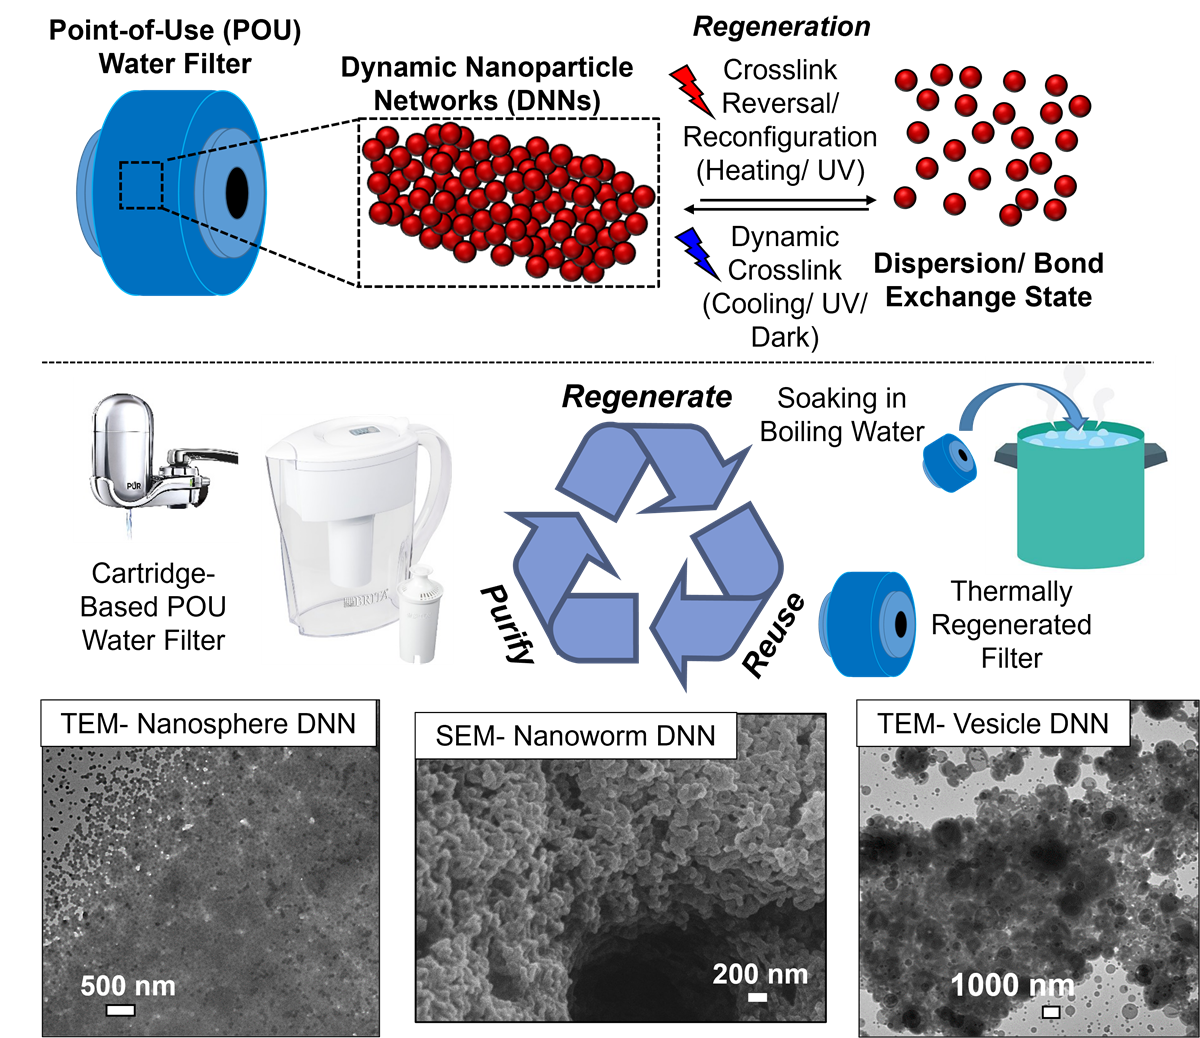 Schematic of point-of-use water filter concept: Dynamic Nanoparticle Networks that undergo reversable crosslinking to trap pollutants can be regenerated for repeated use. Scanning Electron Microscopy images of the nanoparticles in three forms: spheres, worms, and vesicles.